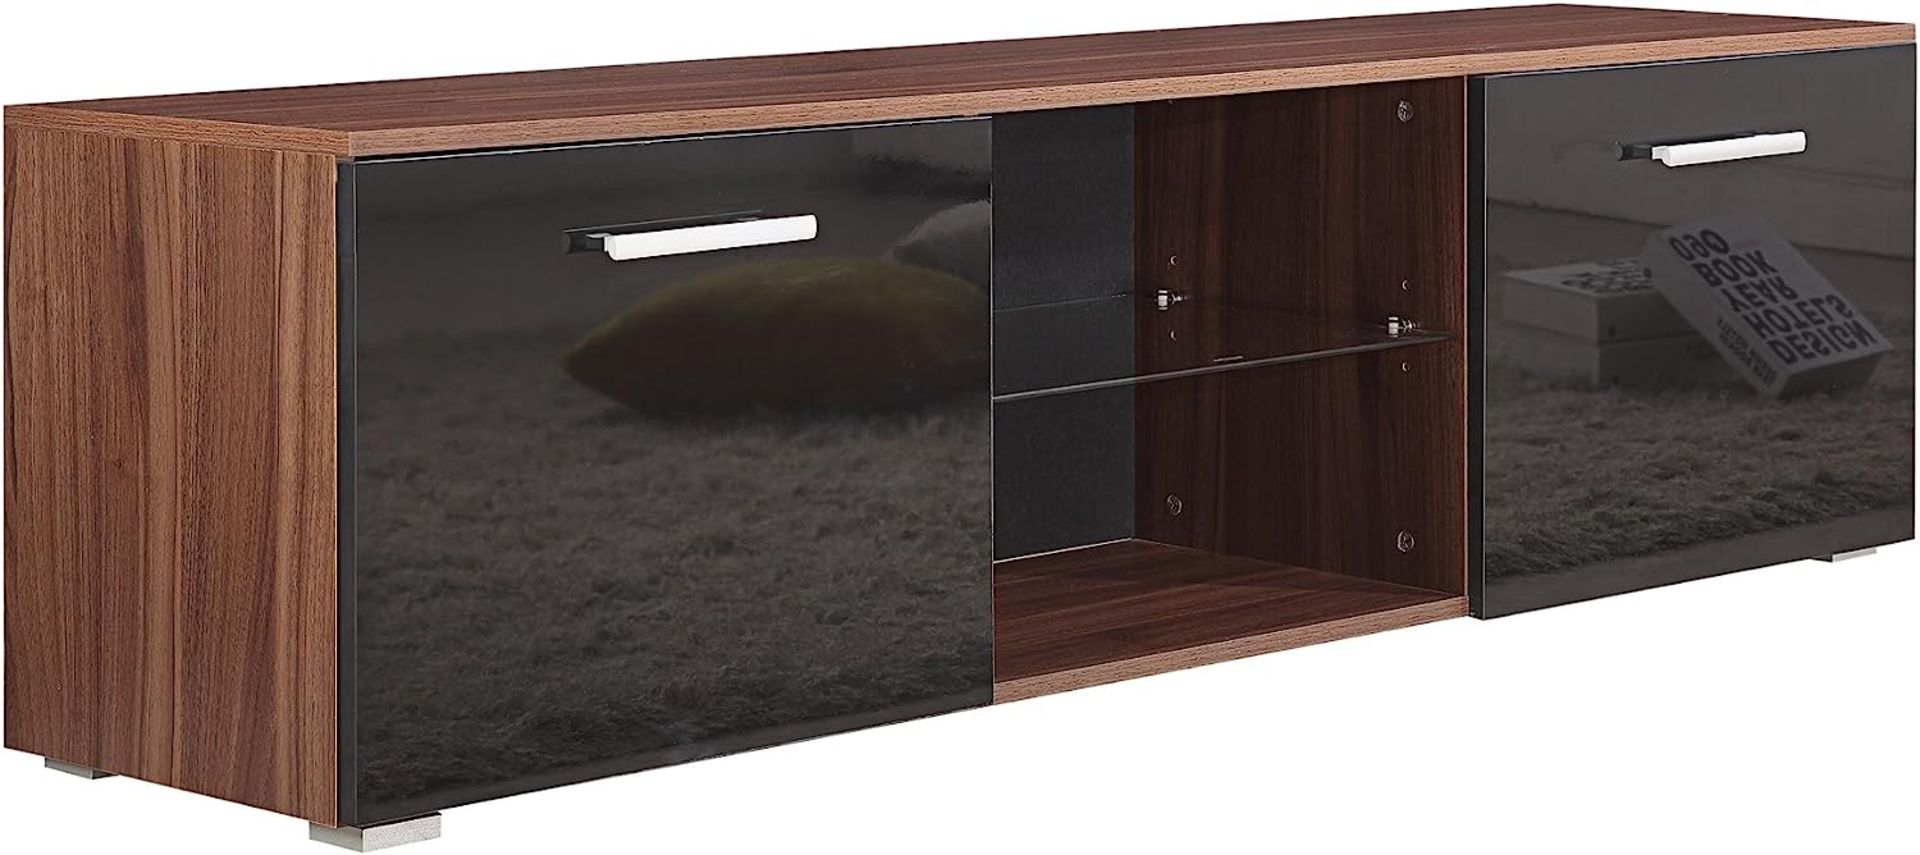 10 X BRAND NEW MODERN 160CM TV STAND CABINET UNIT WITH HIGH GLOSS DOORS (BLACK ON WALNUT) - Image 3 of 9